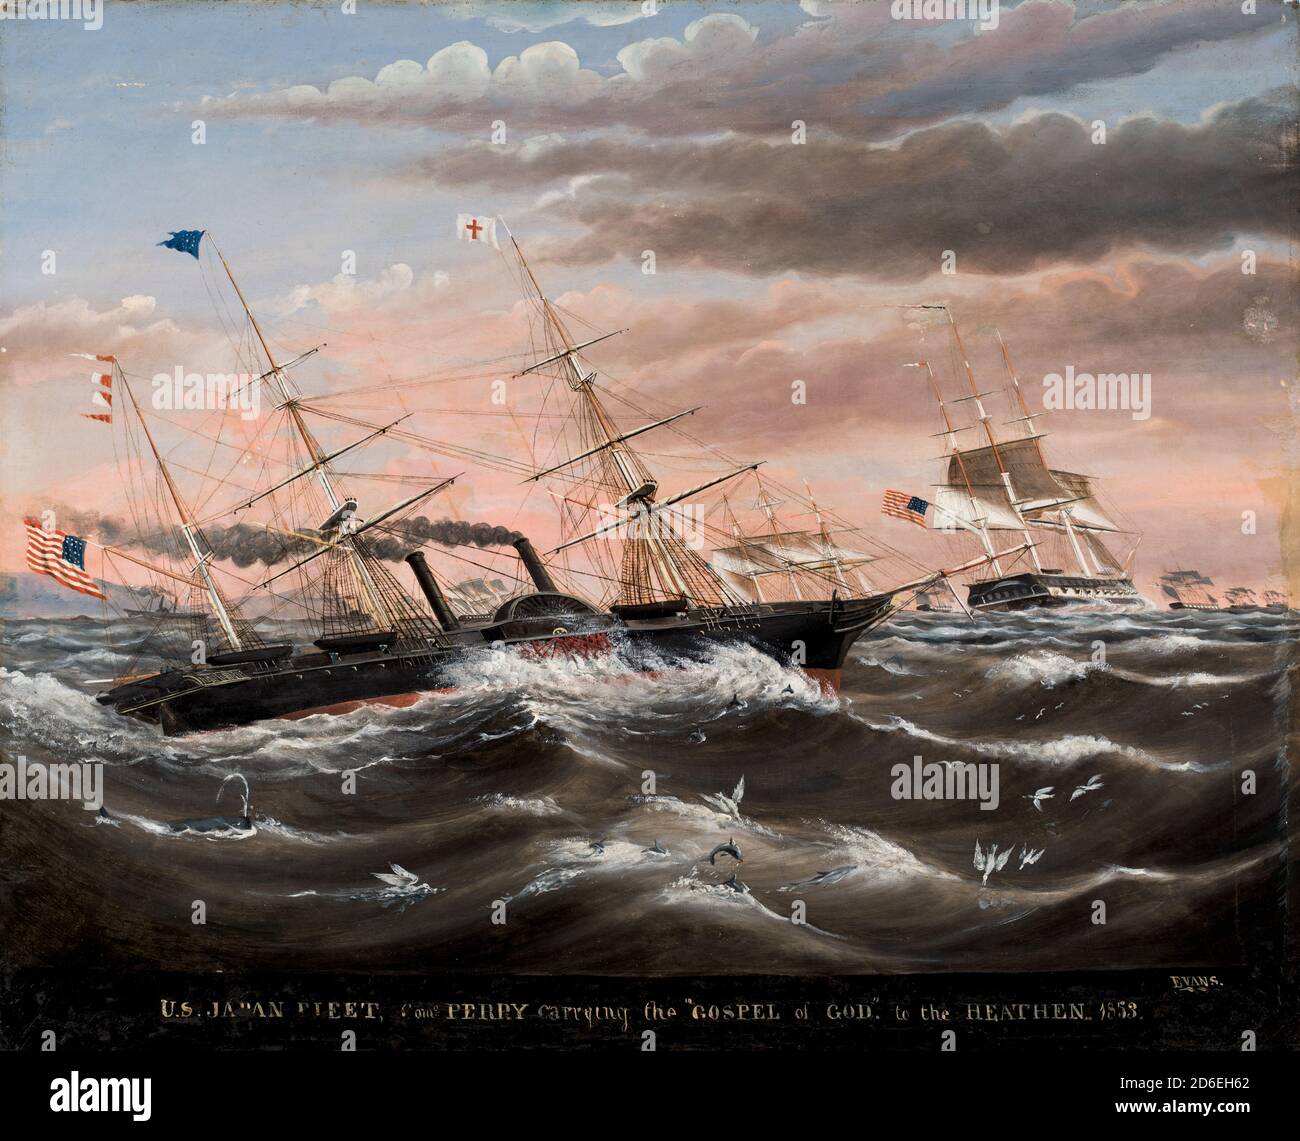 Painting titled U.S. Japan Fleet, Como. Perry carrying the Gospel of God to the Heathen, by James G. Evans, circa 1853. Oil on canvas. Stock Photo